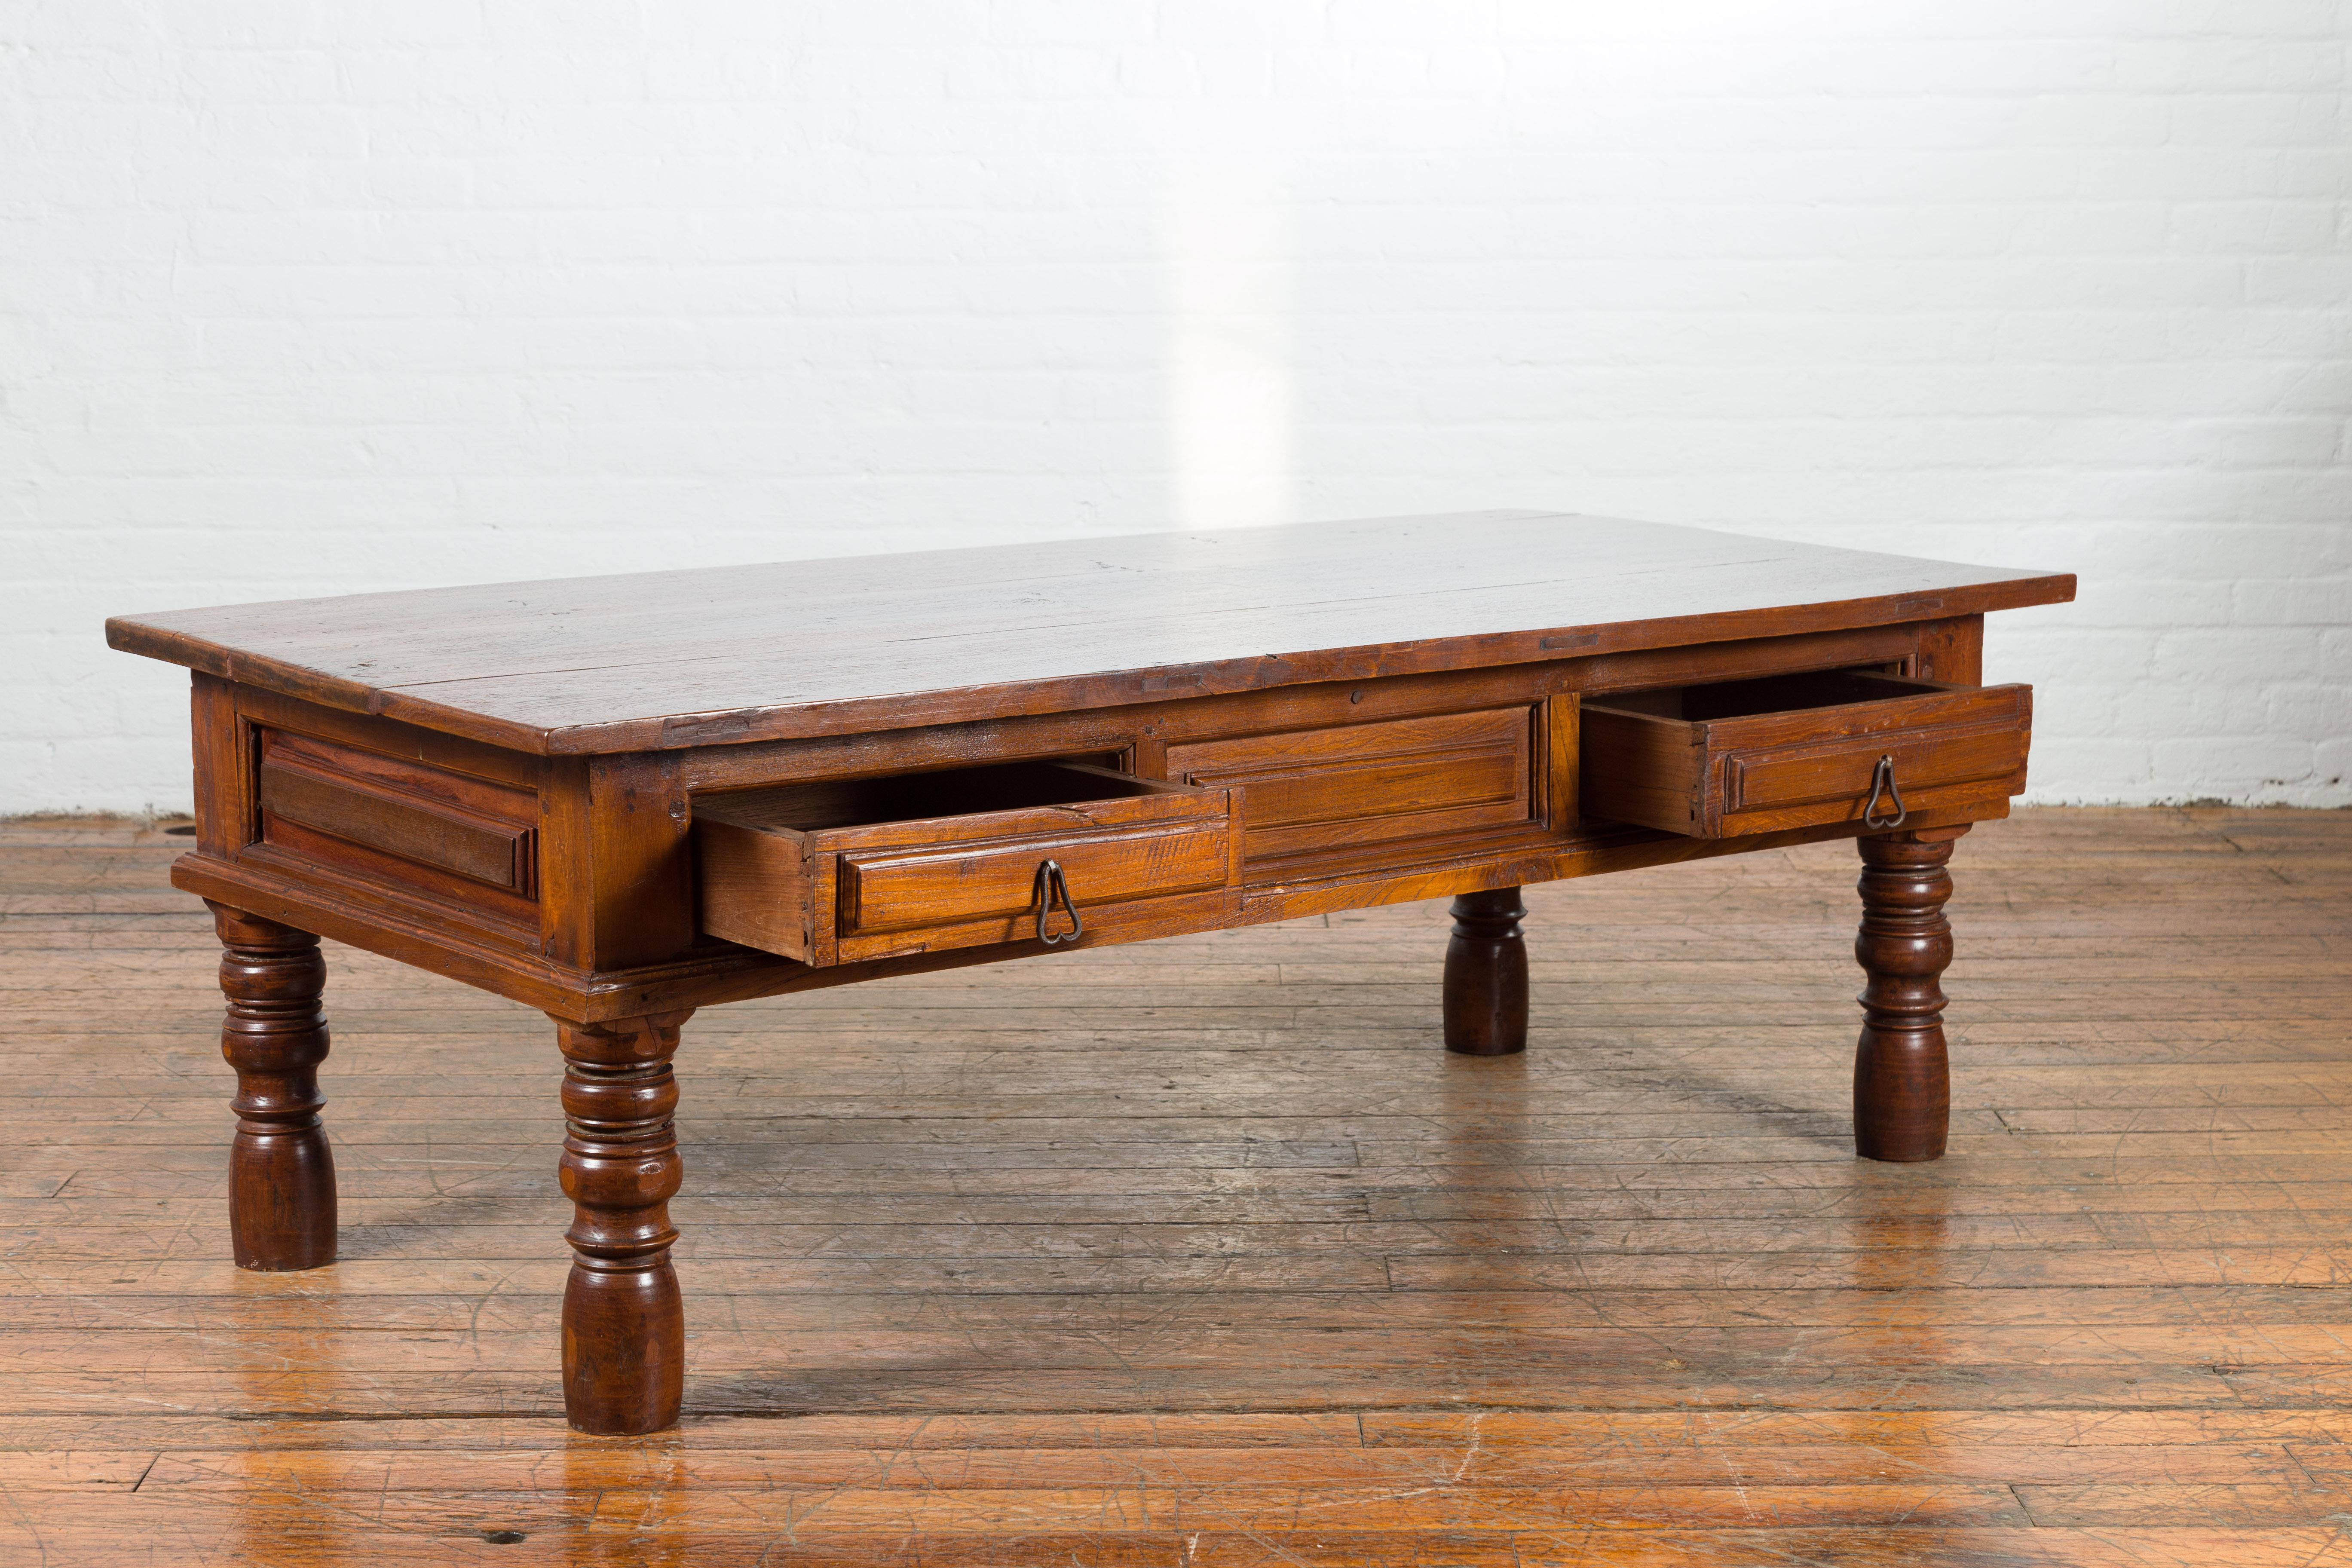 Vintage Indian Wooden Coffee Table with Two Drawers and Baluster Legs In Good Condition For Sale In Yonkers, NY